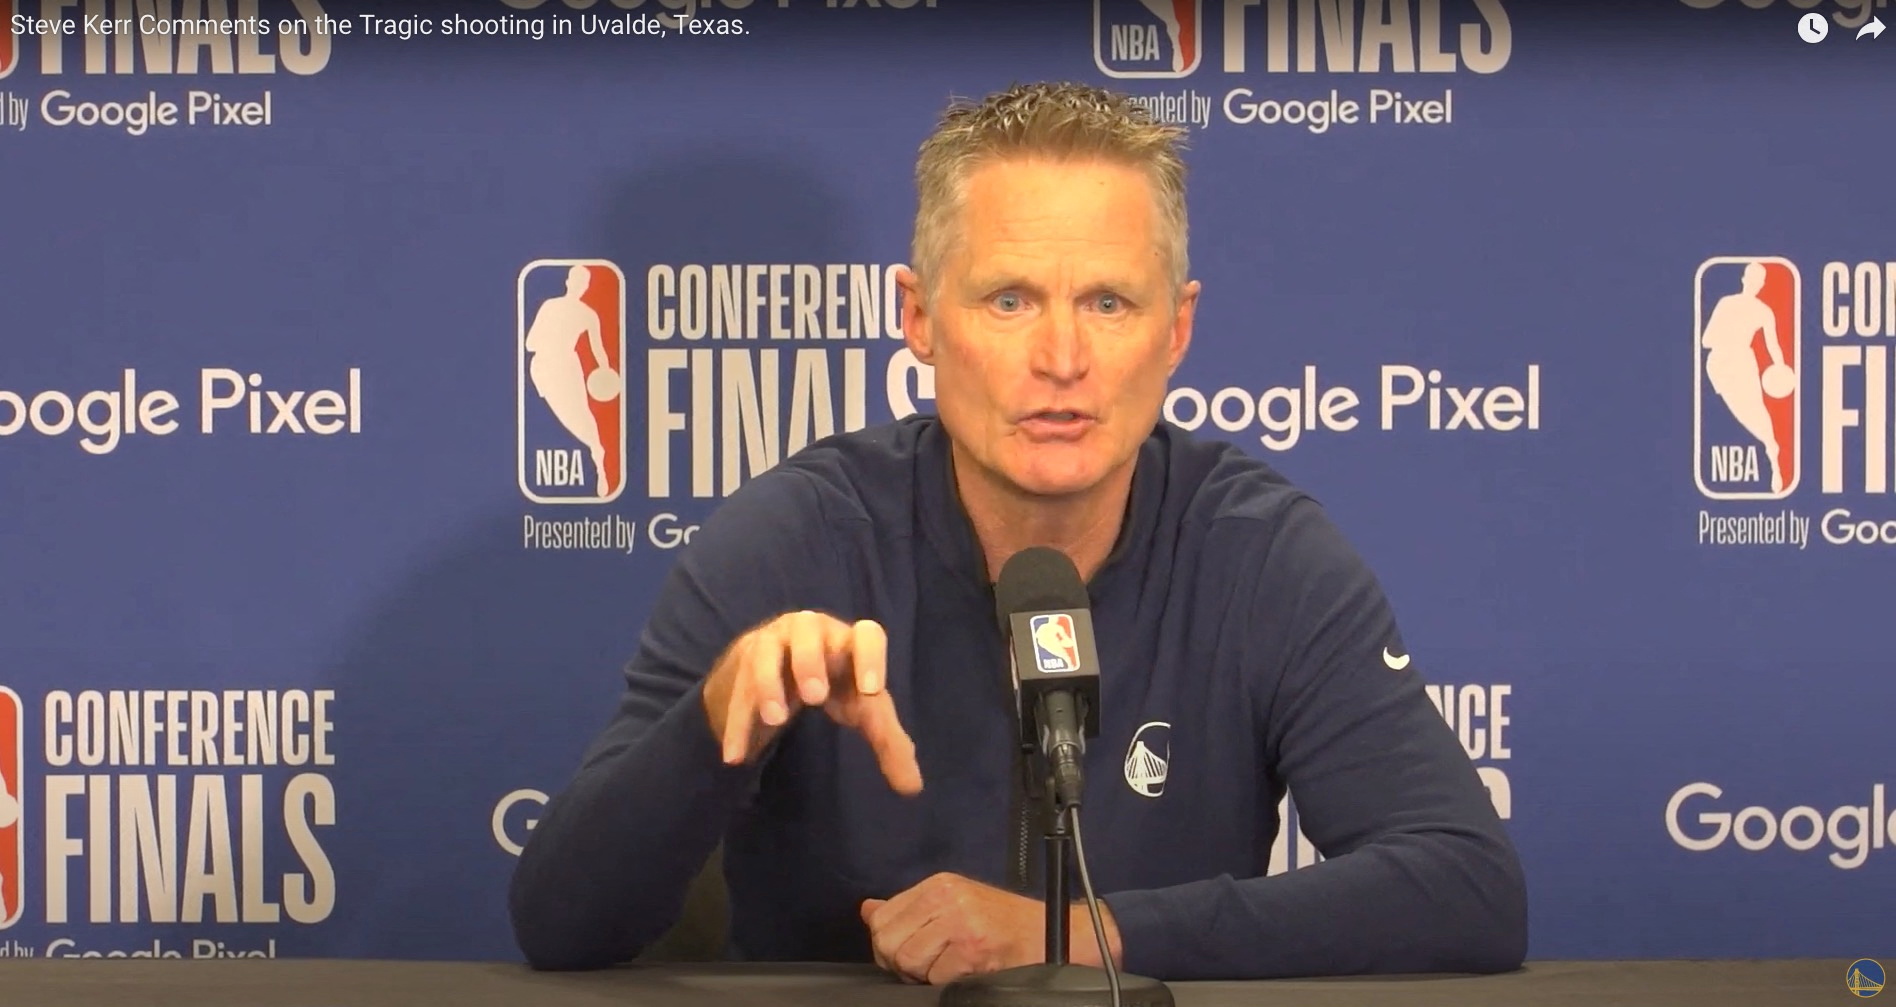 Golden State Warriors head coach Steve Kerr speaks about the Texas shooting at a news conference in Dallas, Texas